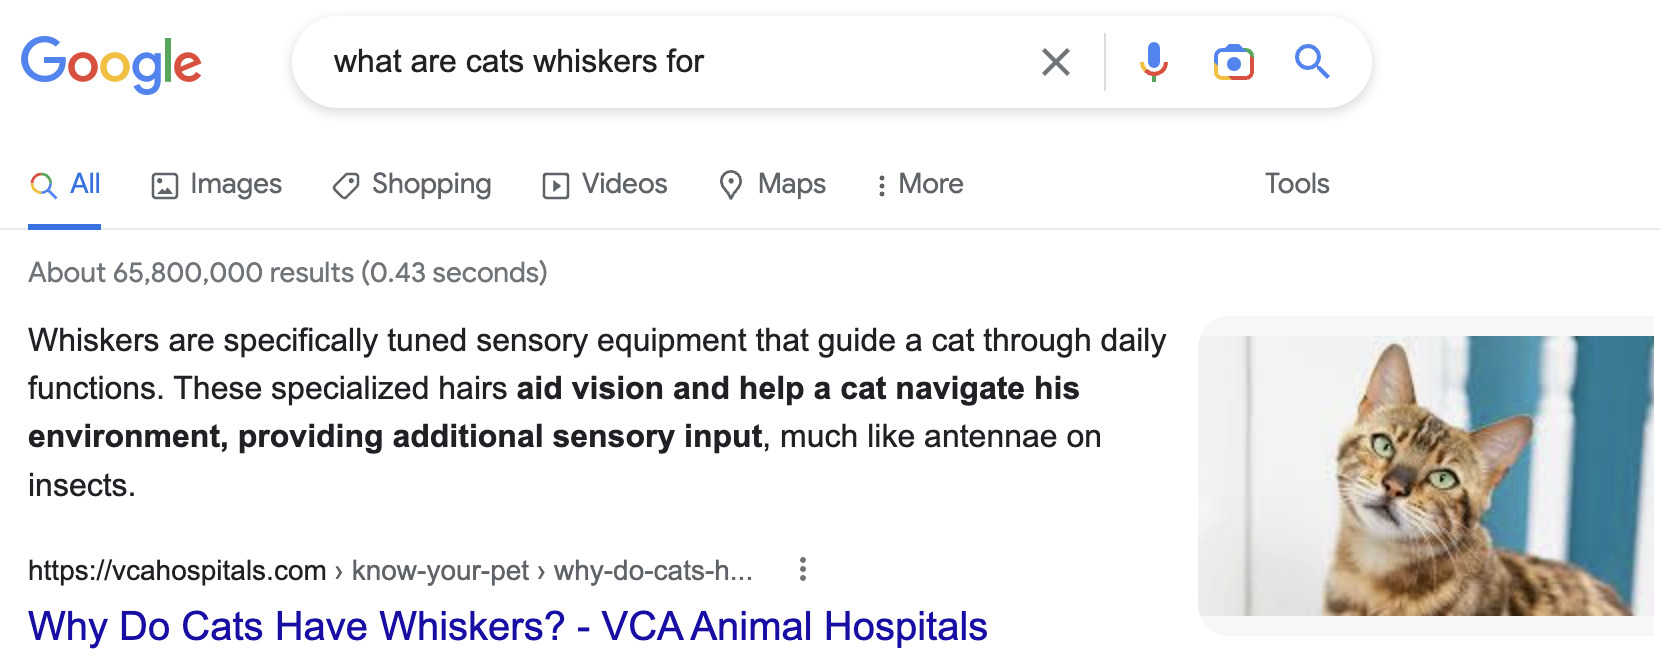 Featured snippet search result for "what are cats whiskers for," via Google.com